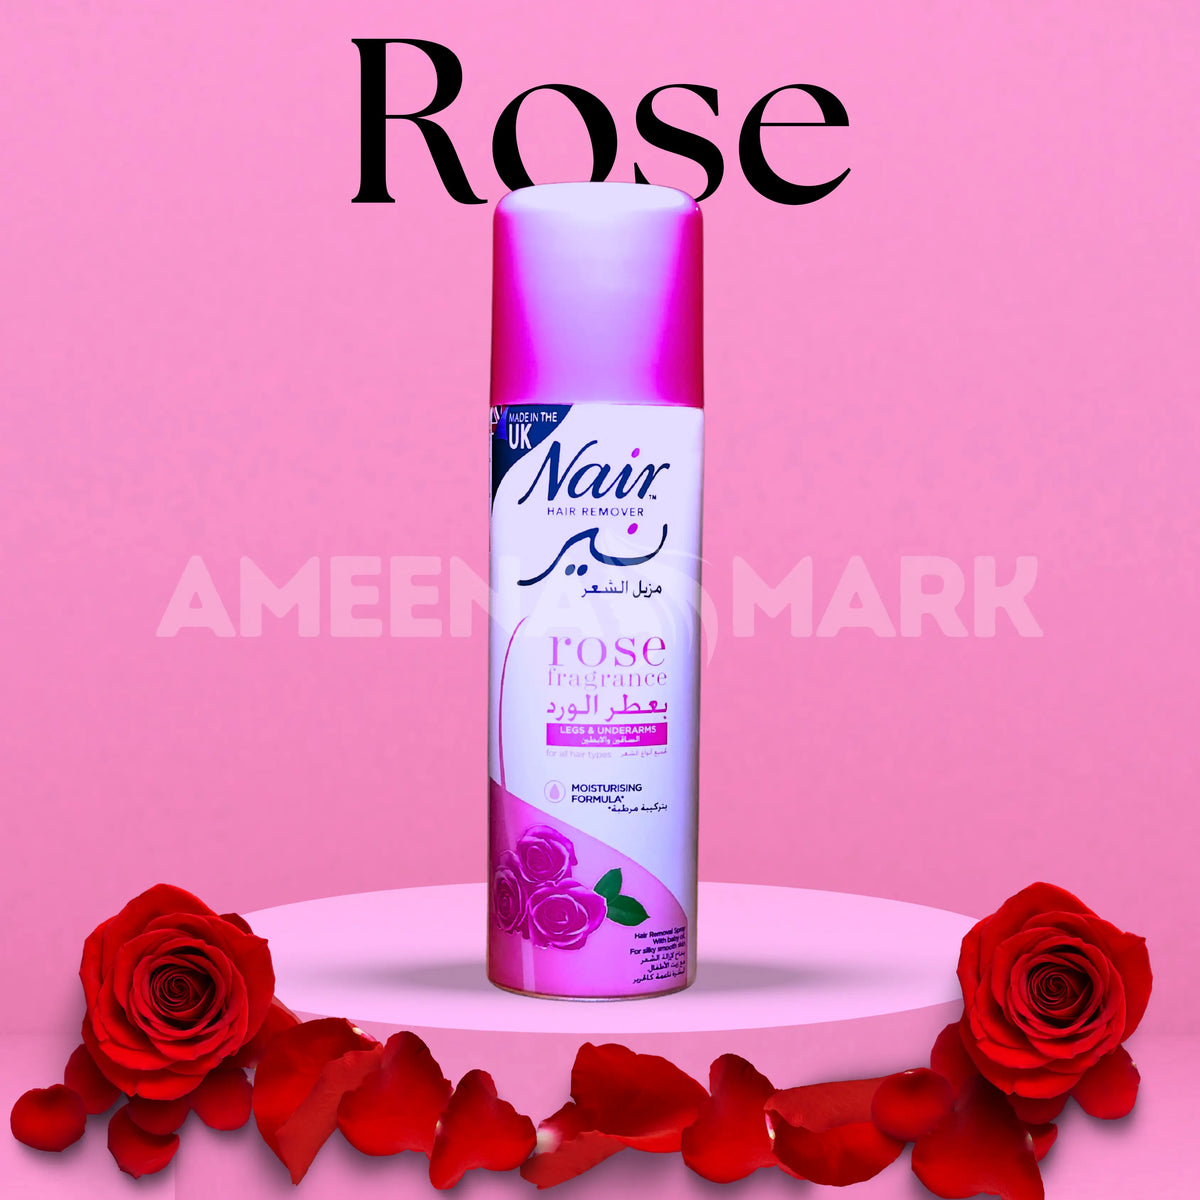 Nair Hair Remover (Hair Removal Spray With Rose Extract & Baby Oil (200 ML)  - Sale price - Buy online in Pakistan 